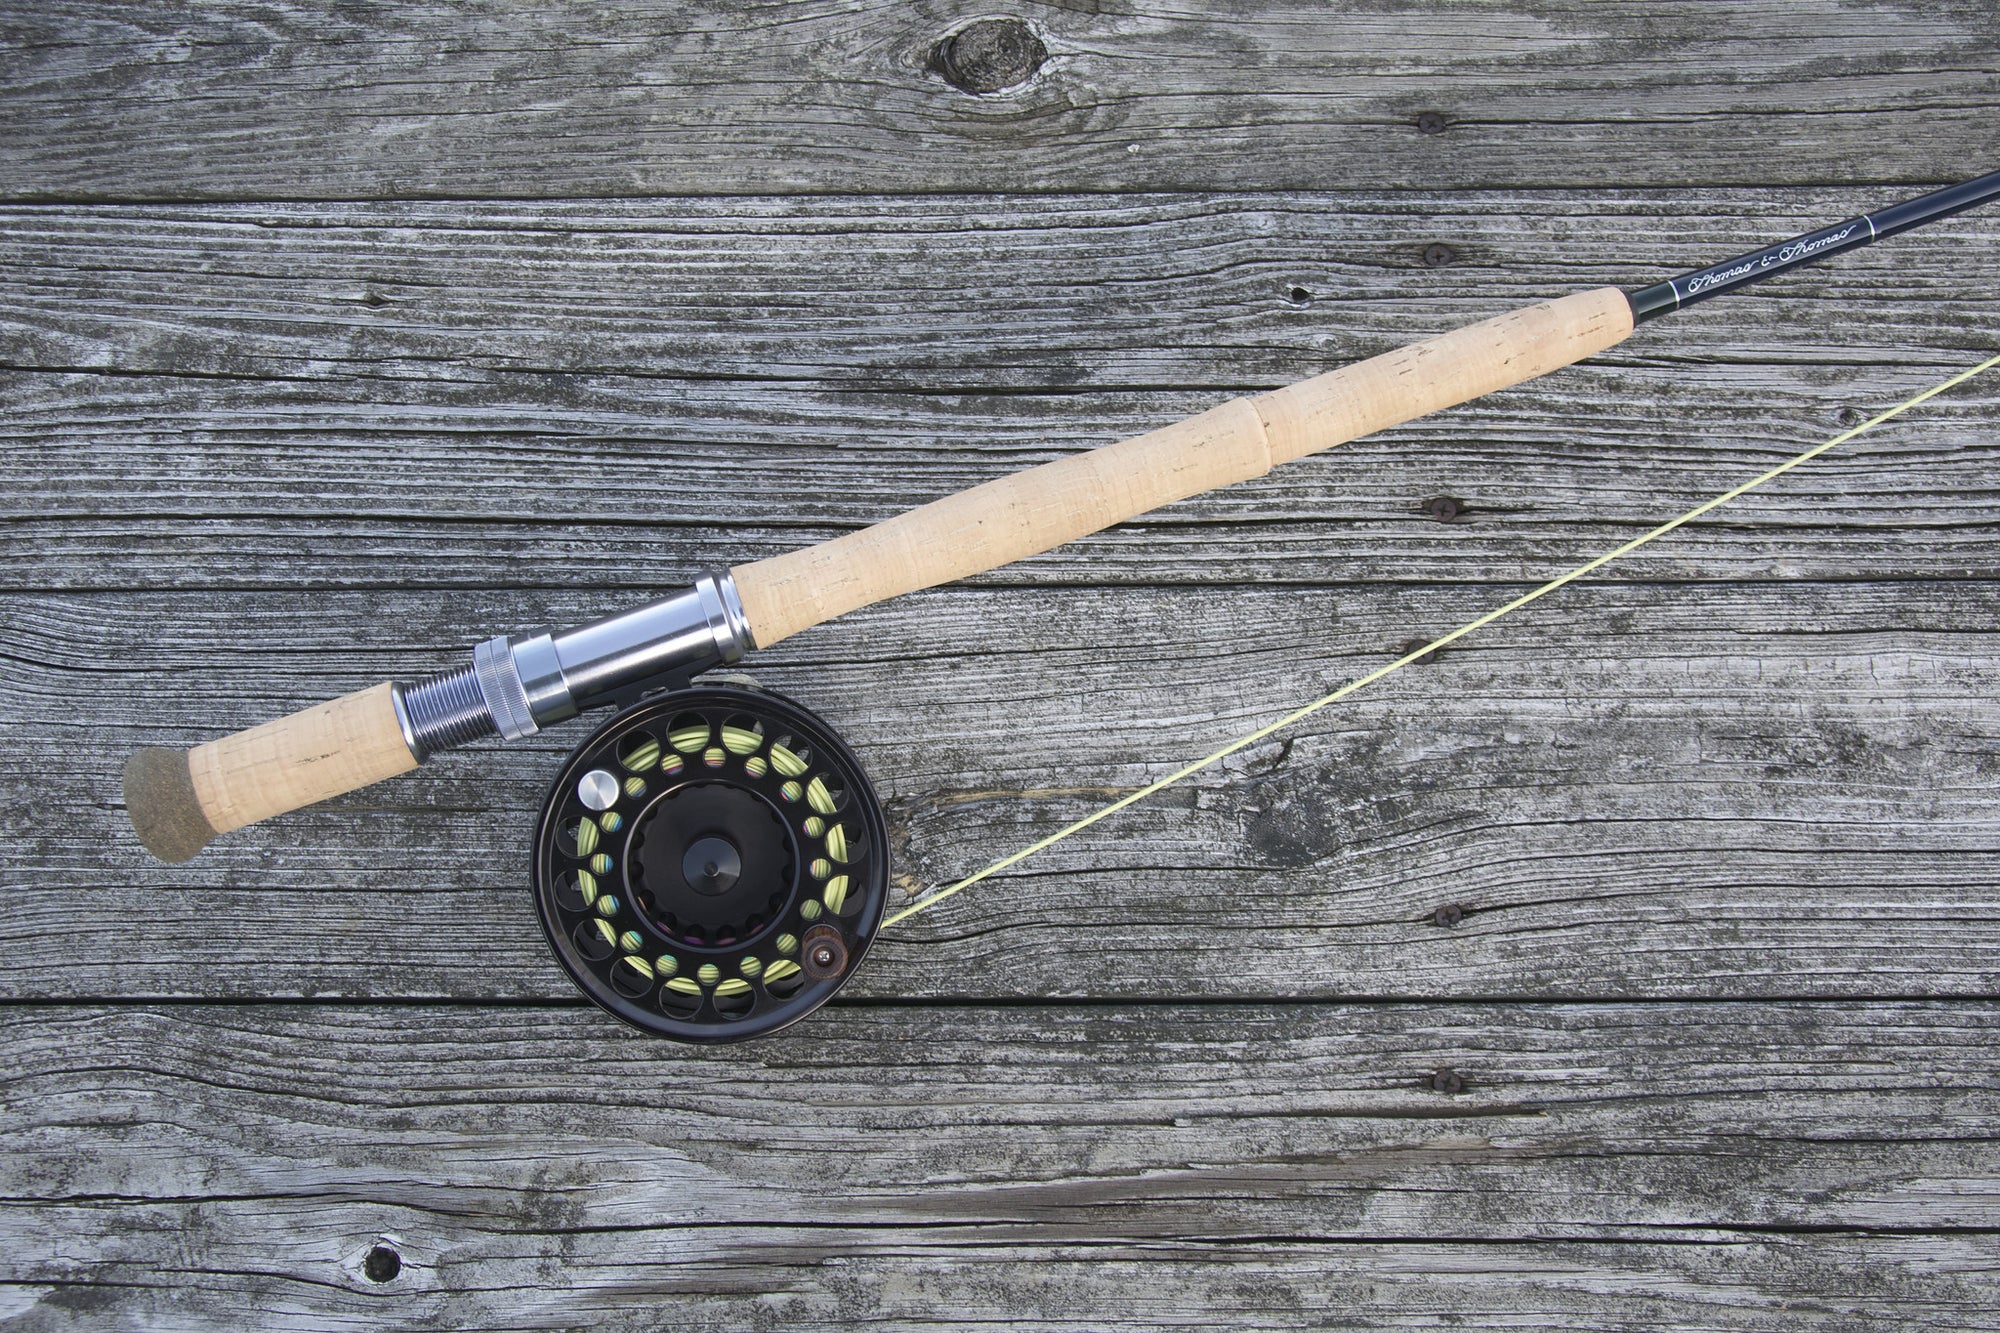 Thomas & Thomas Bluewater Fly Rod | The Rod You Will Eventually Own